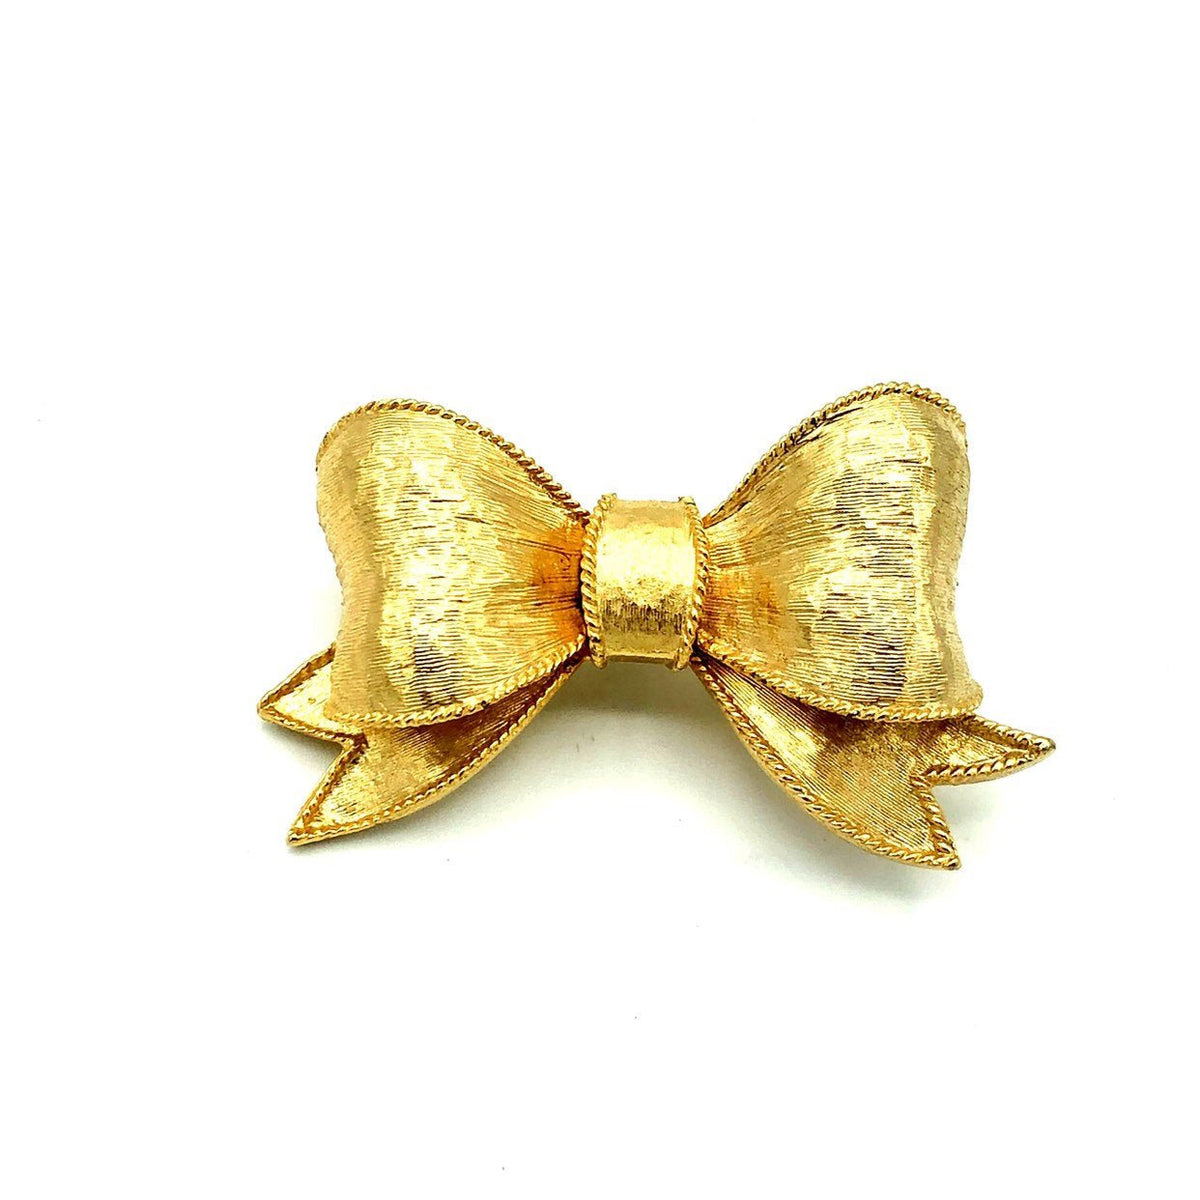 Classic Petite Gold Bow Ribbon Brooch - 24 Wishes Vintage Jewelry